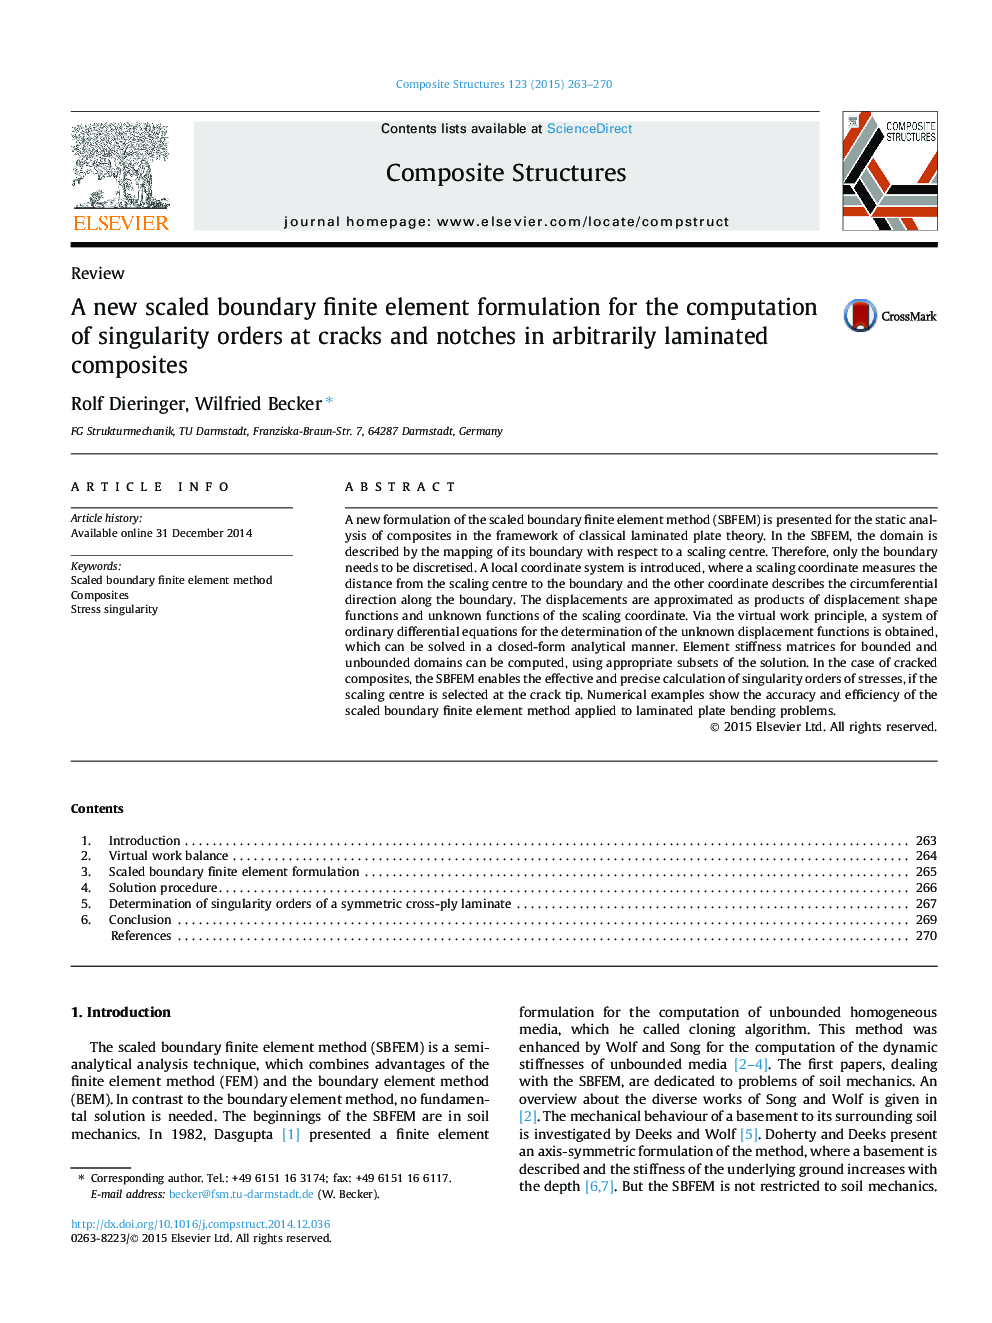 A new scaled boundary finite element formulation for the computation of singularity orders at cracks and notches in arbitrarily laminated composites